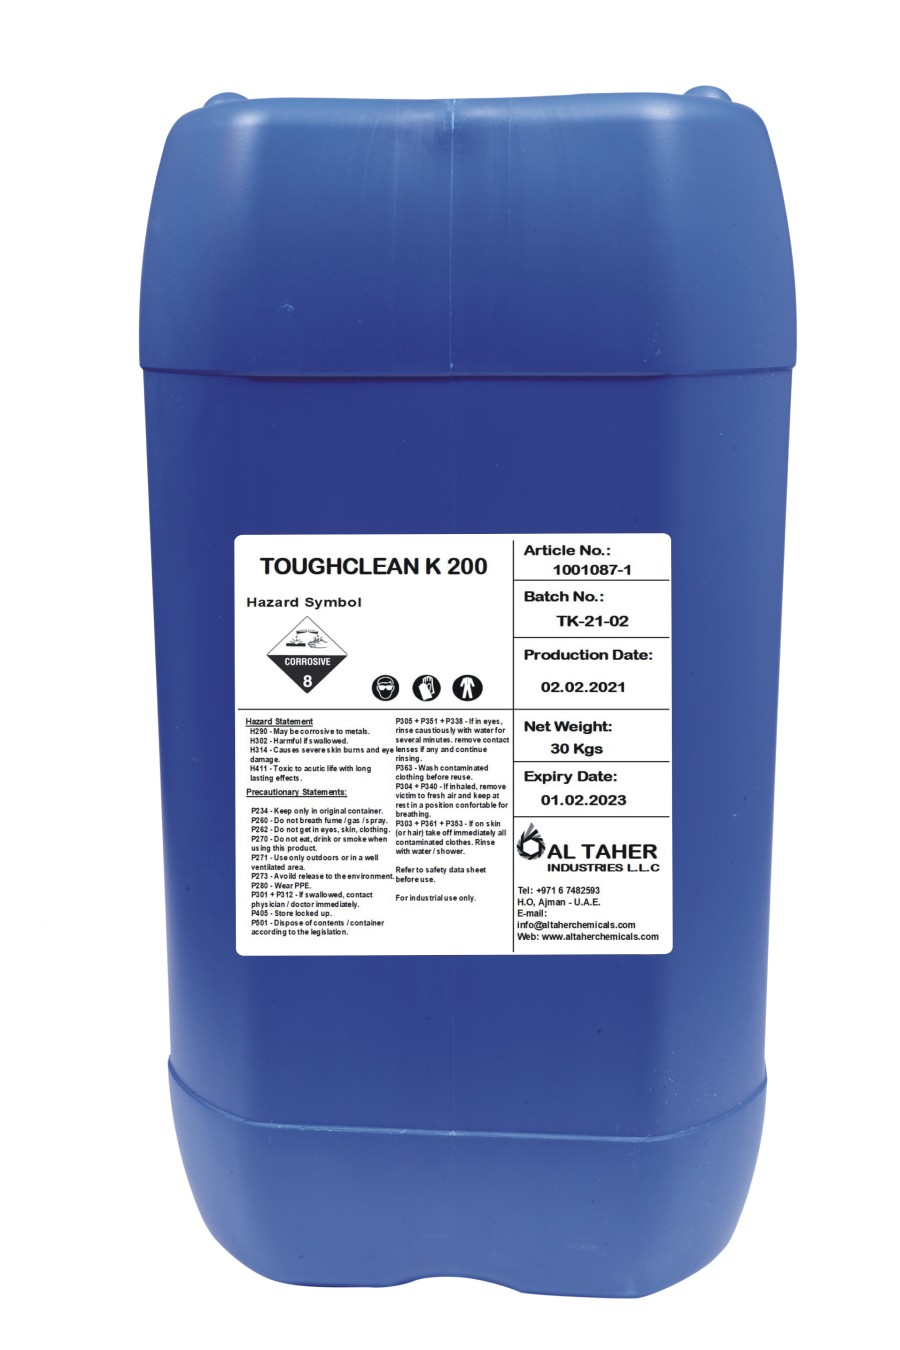 Toughclean: Effective Cleaning Solution for Challenging Surfaces and Materials